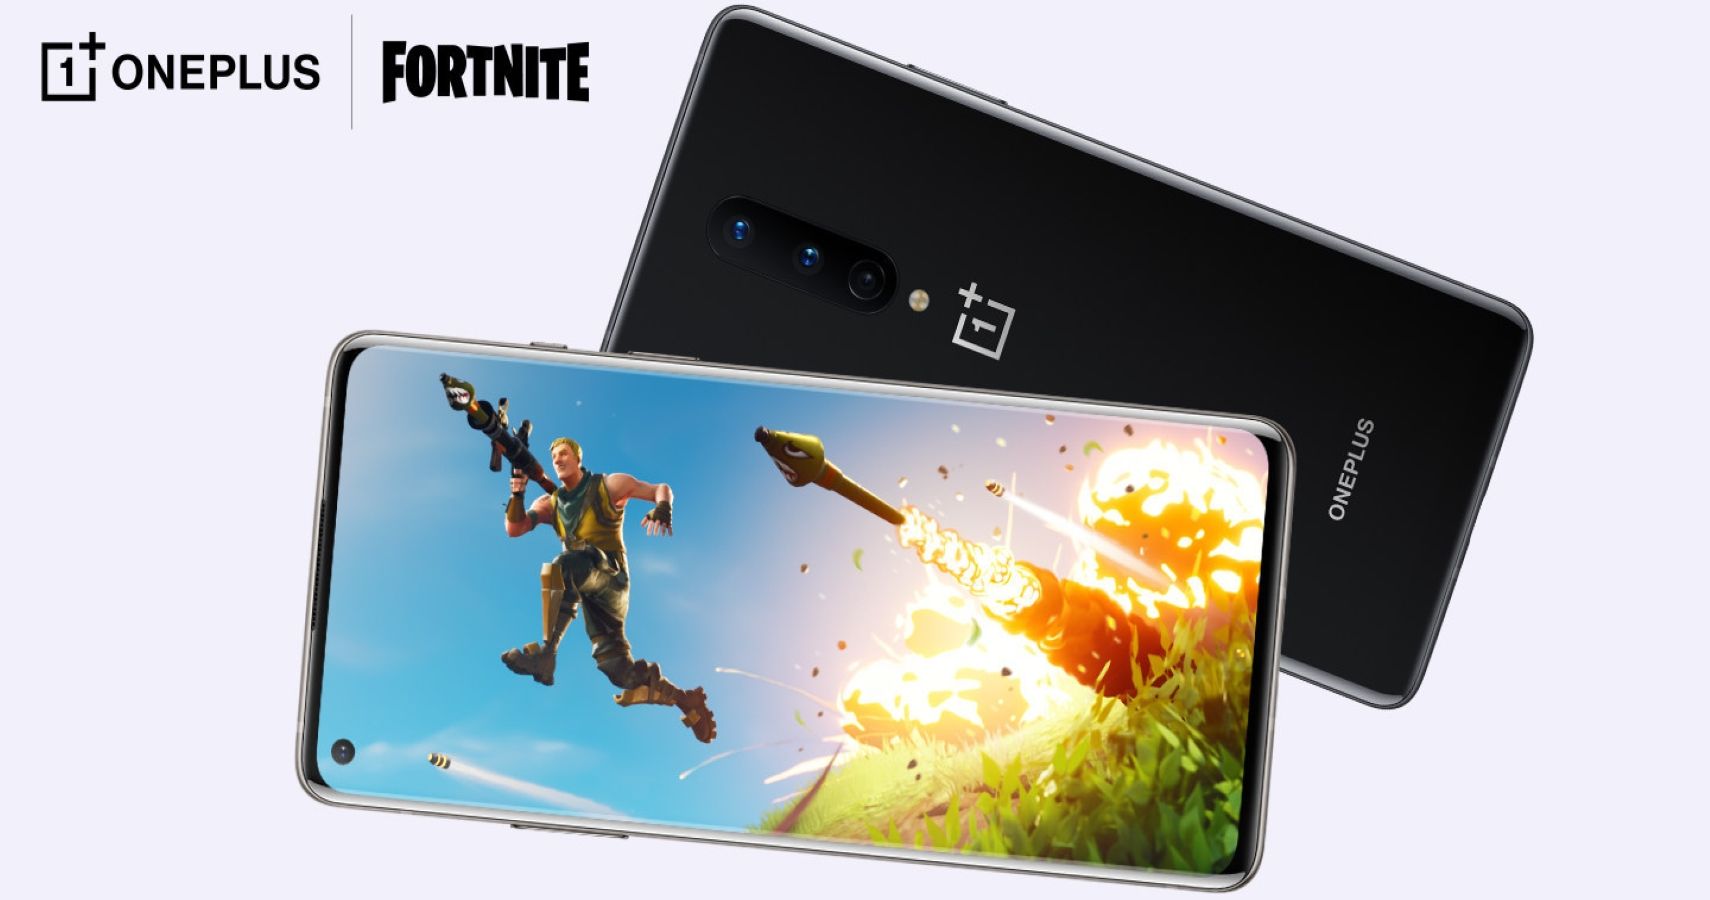 Fortnite Runs At 90 FPS On The OnePlus 8 (Compared To 60 On Consoles)